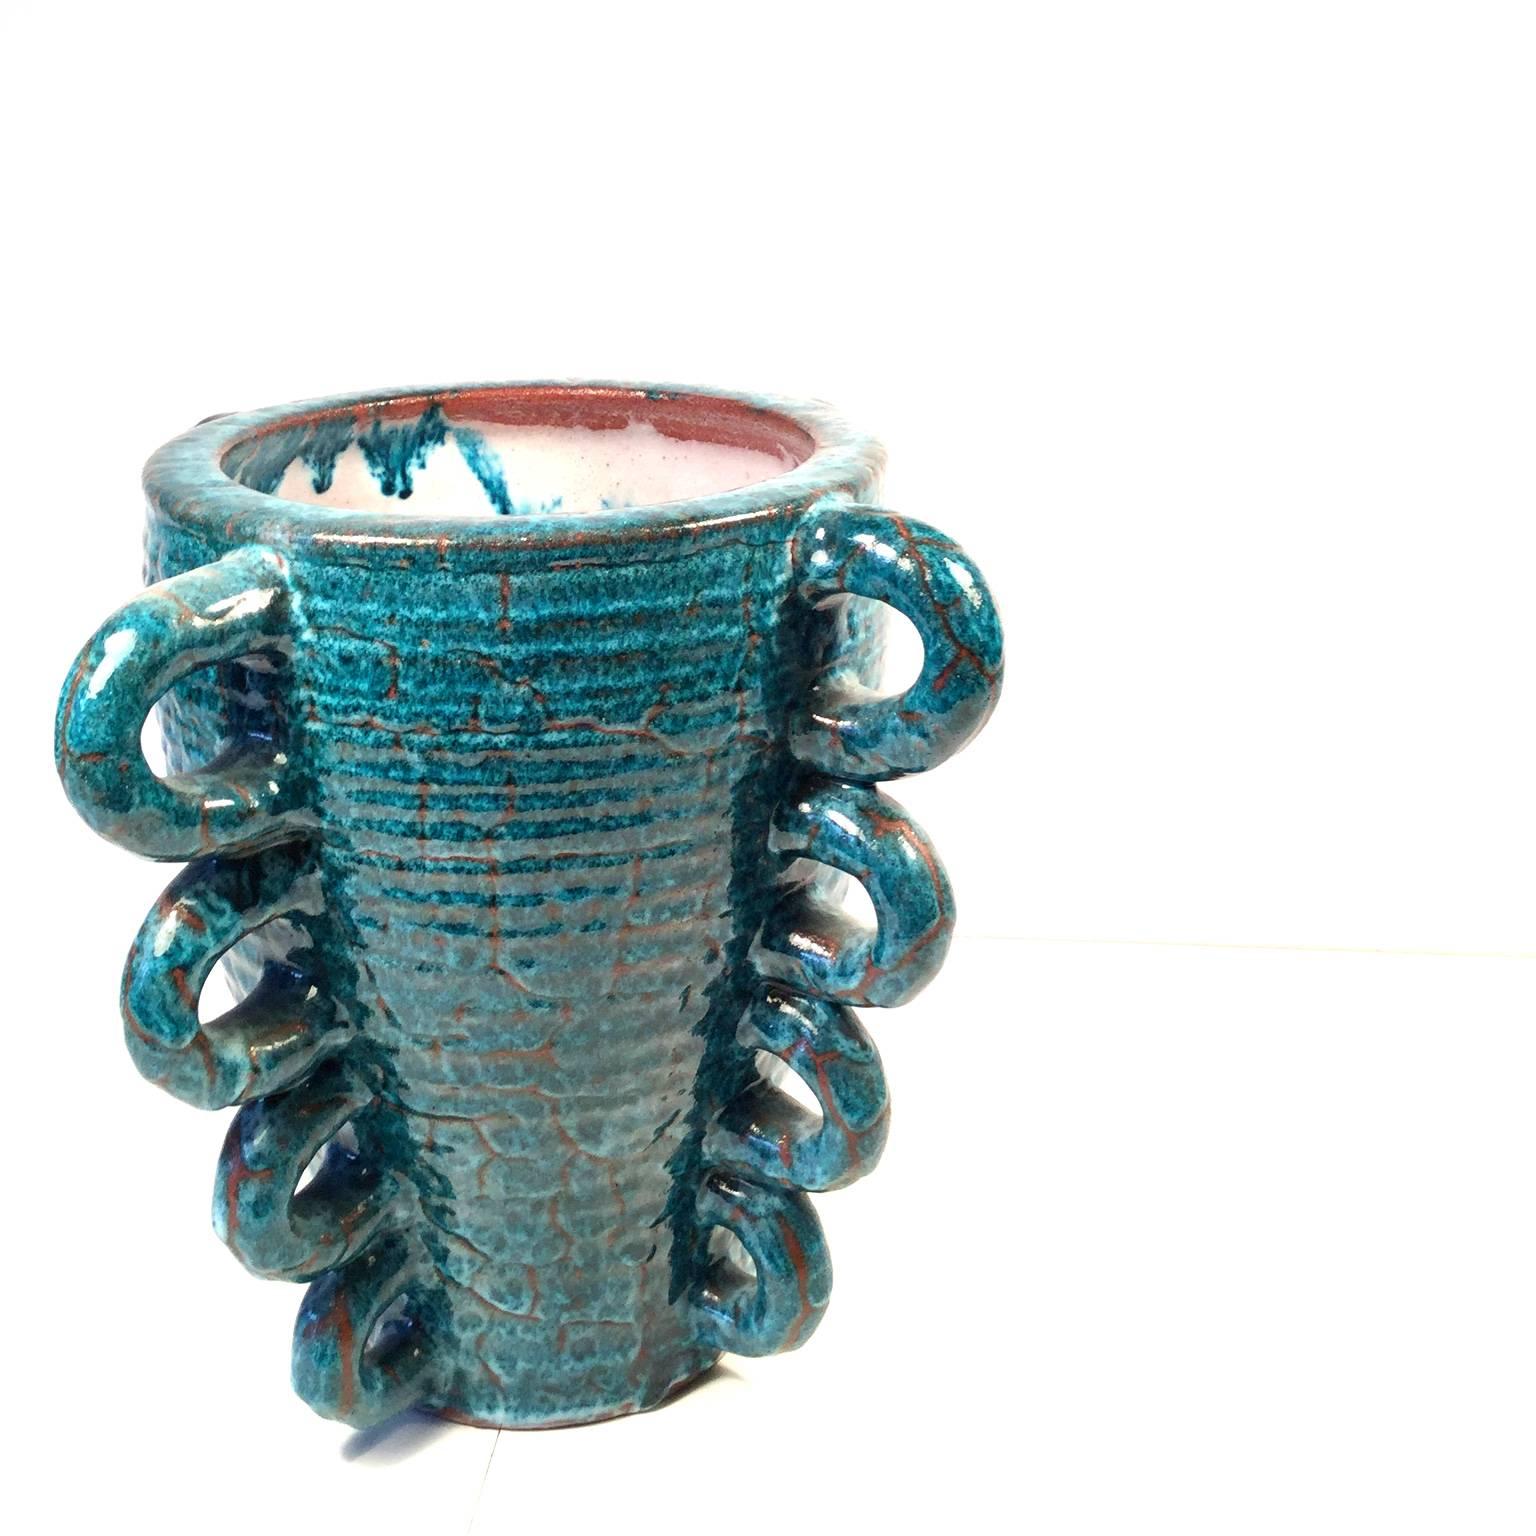 Amazing rare and high quality French terracotta vase with turquoise glazed manufactured by 